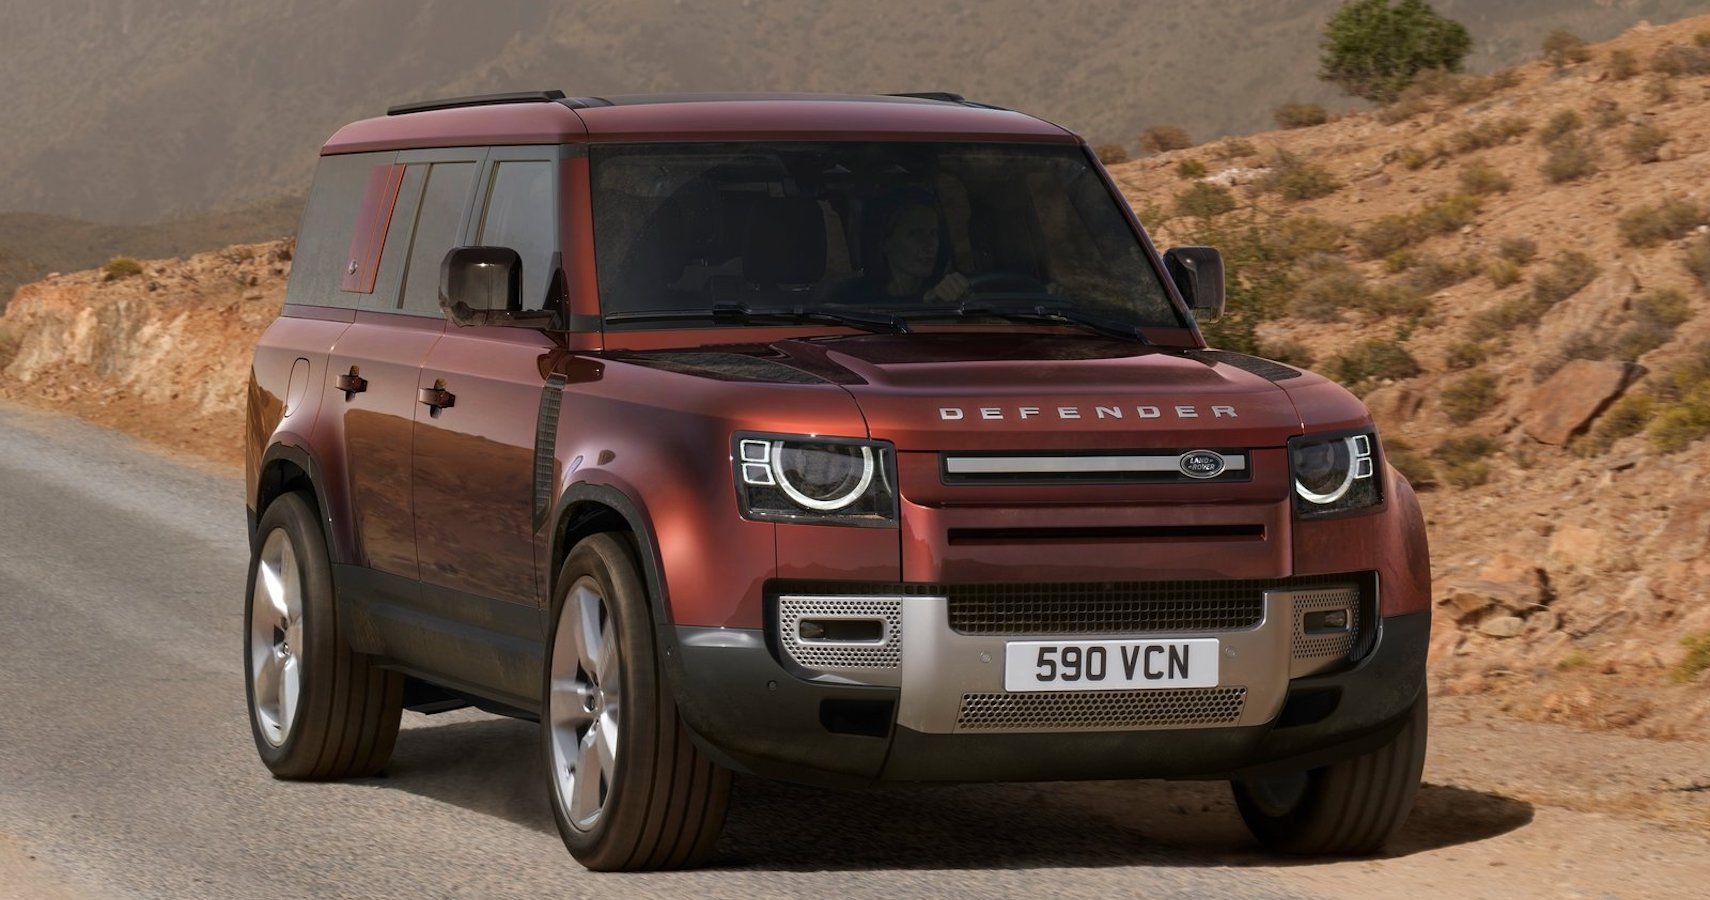 Too easy to steal? UK Range Rovers lose value over security issues